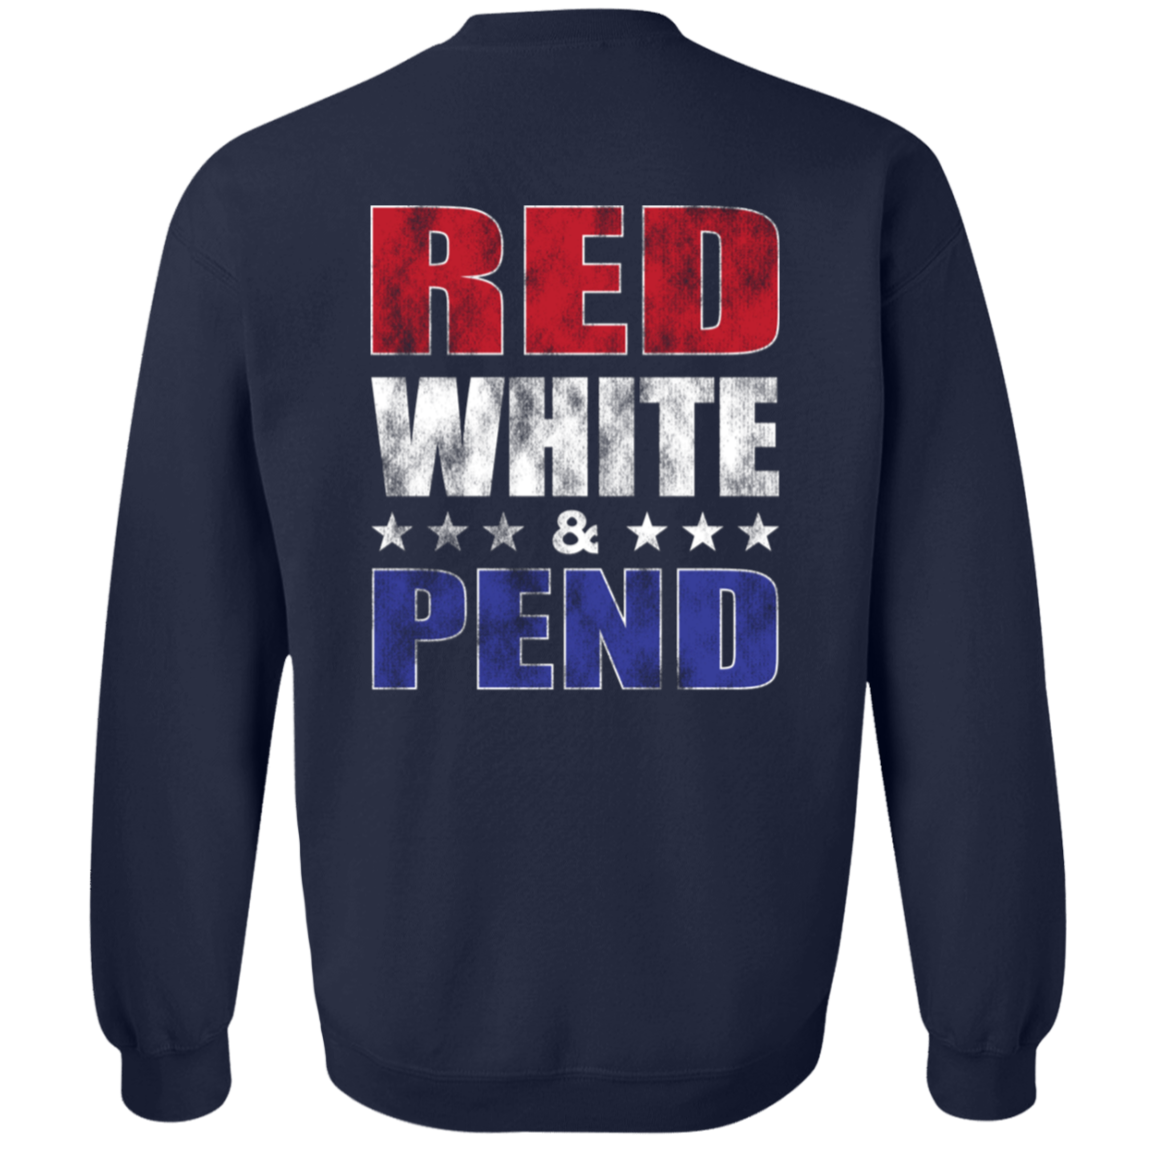 Red White & Pend (on Back) Sweatshirt